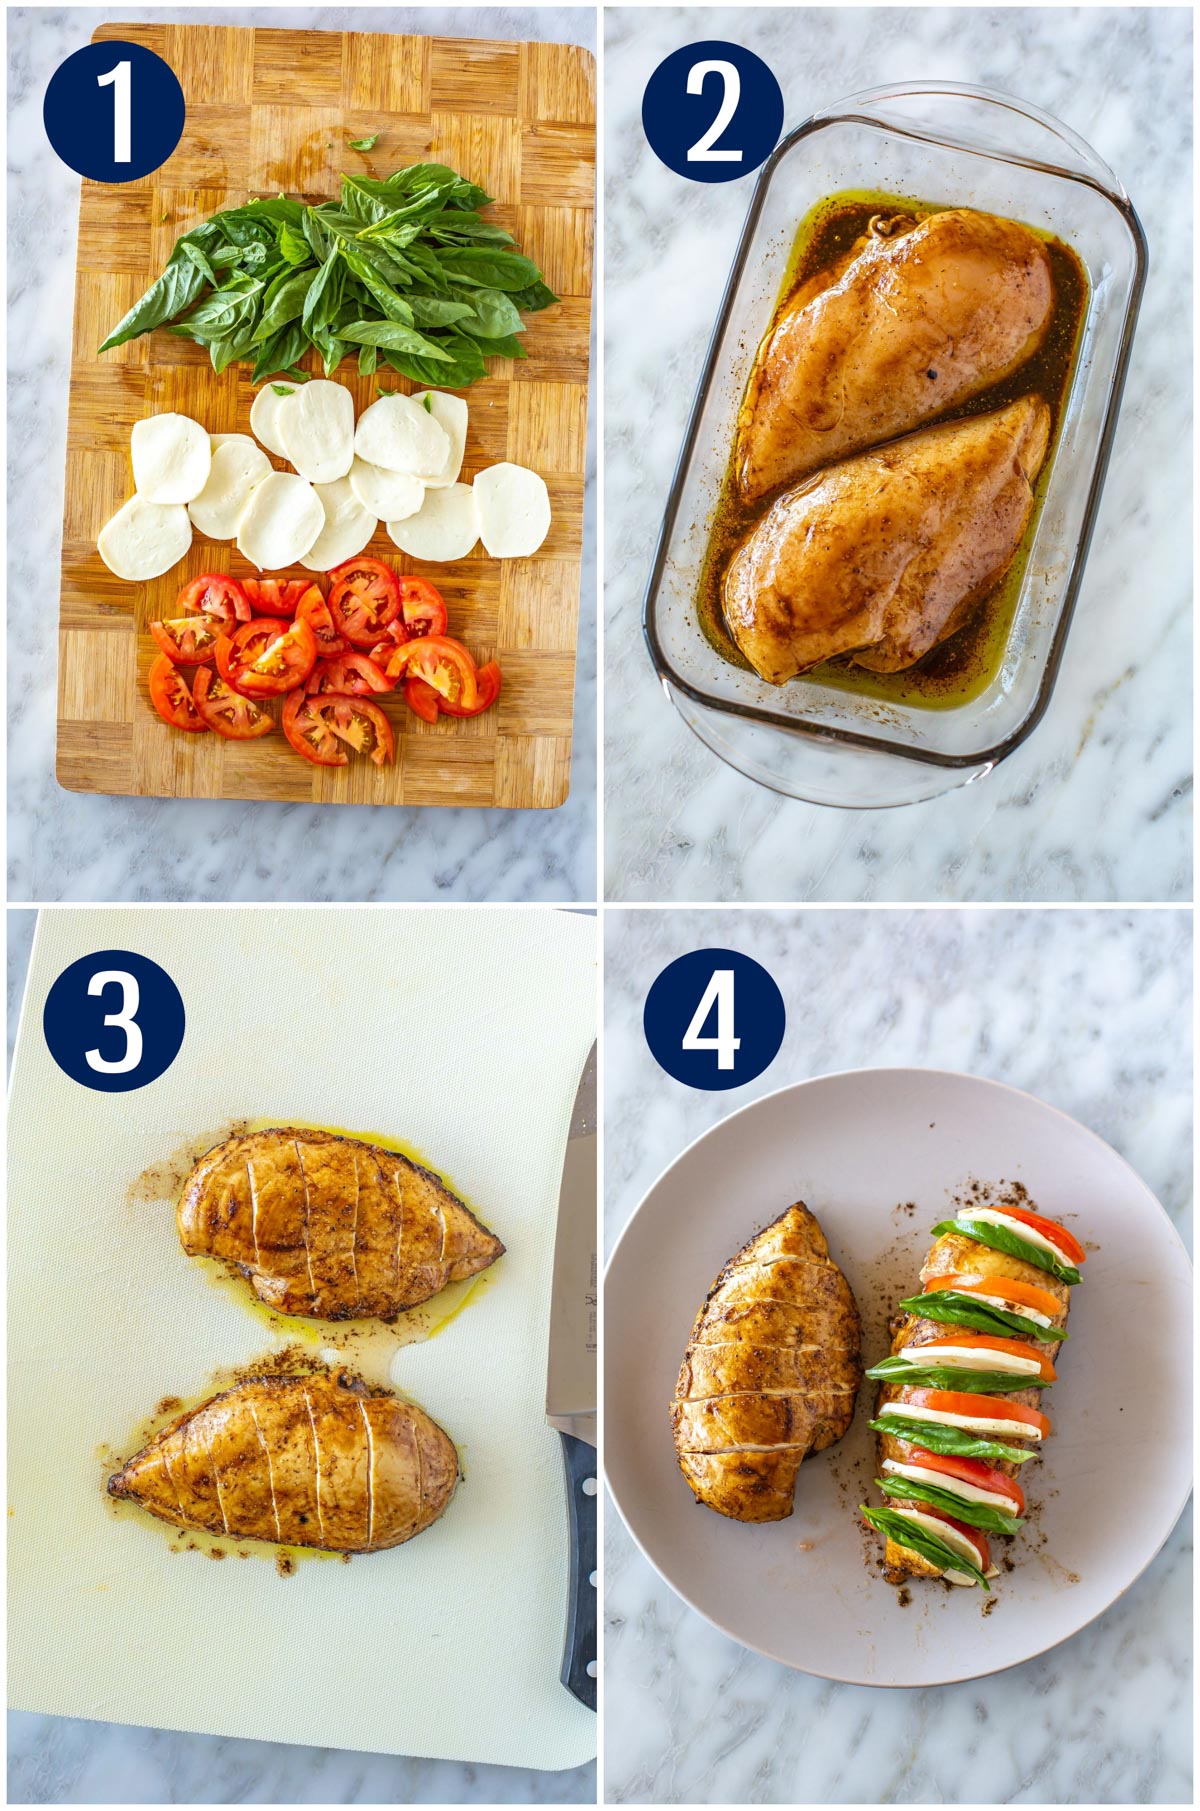 Step-by-step instructions for hasselback caprese chicken: prepare tomatoes, mozzarella and basil, marinate chicken, cut slices in cooked chicken, stuff chicken with tomatoes, mozzarella and basil.